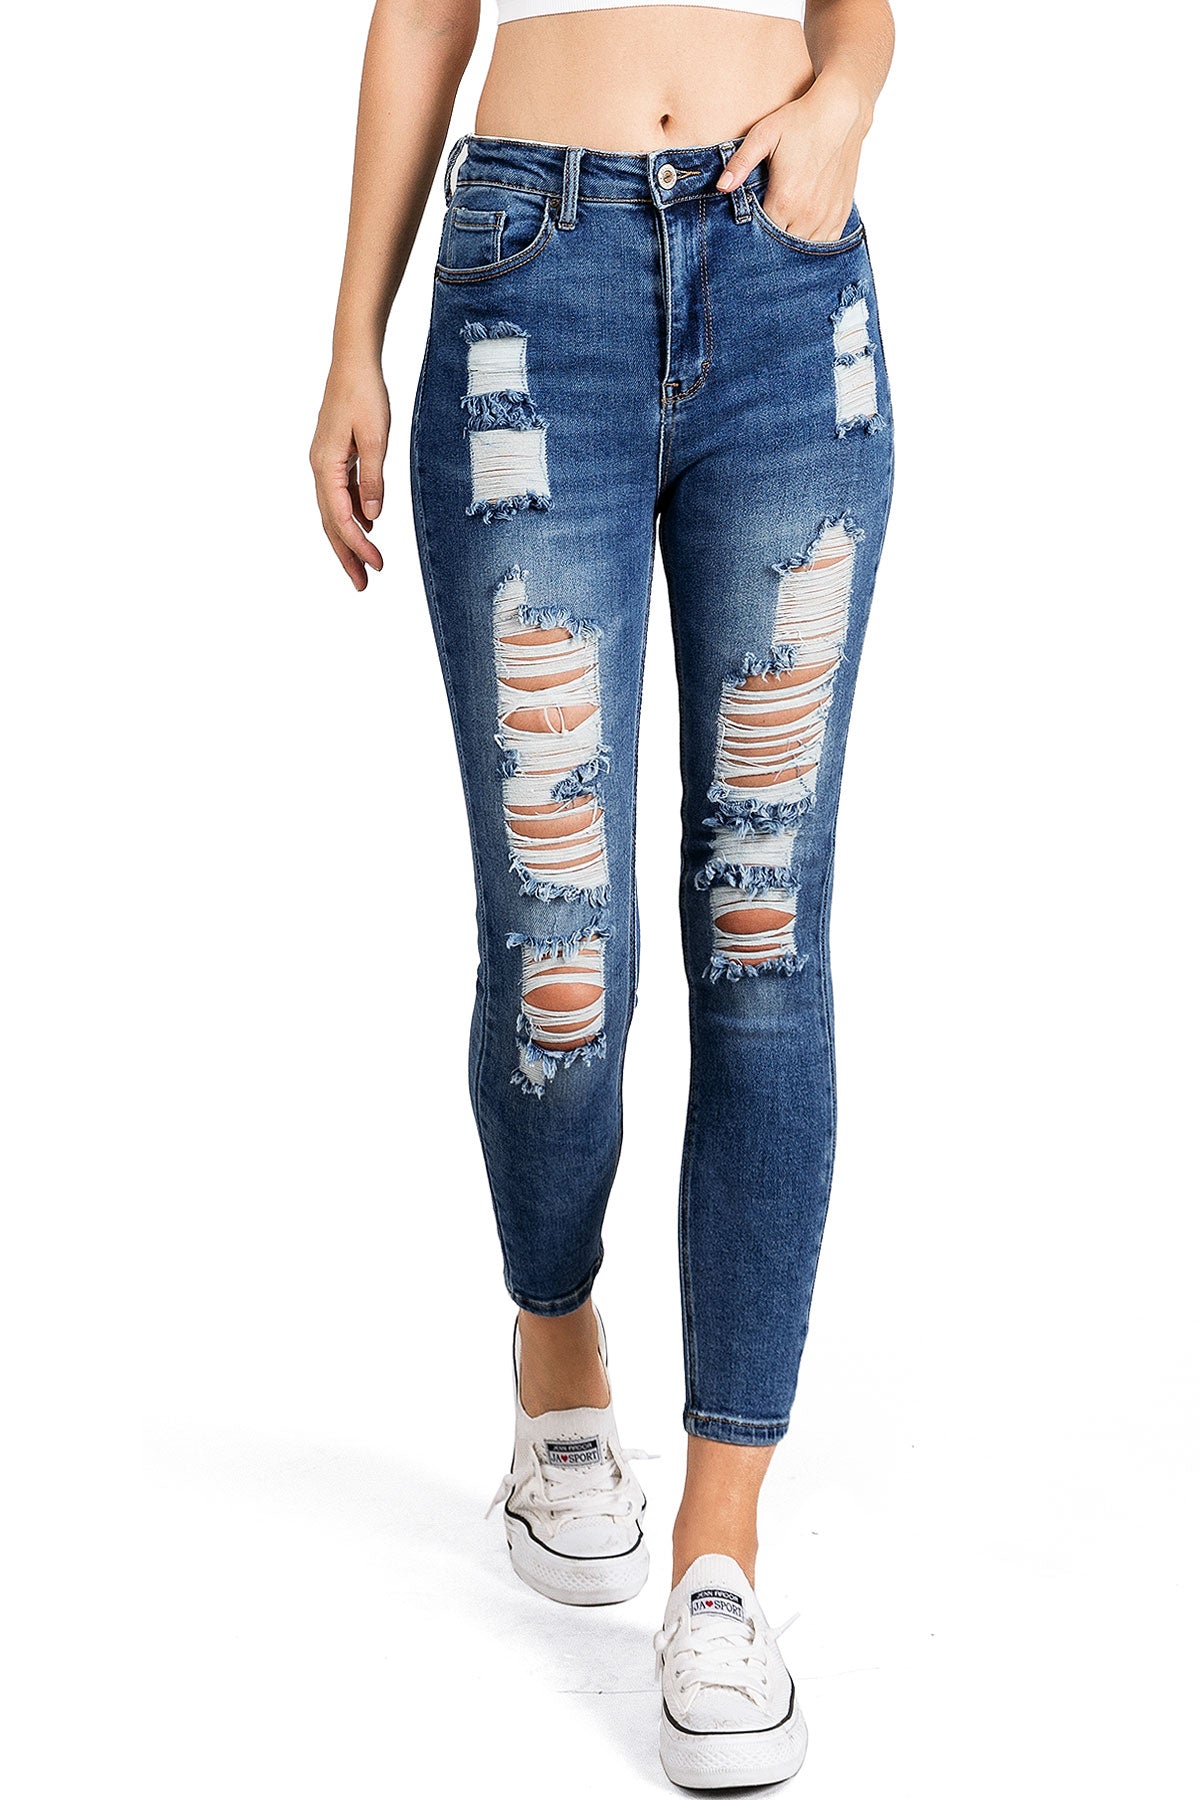 Wax Jean Women's Juniors Distressed High Rise Ankle Skinny Jeans (Dark, 7) - image 1 of 5